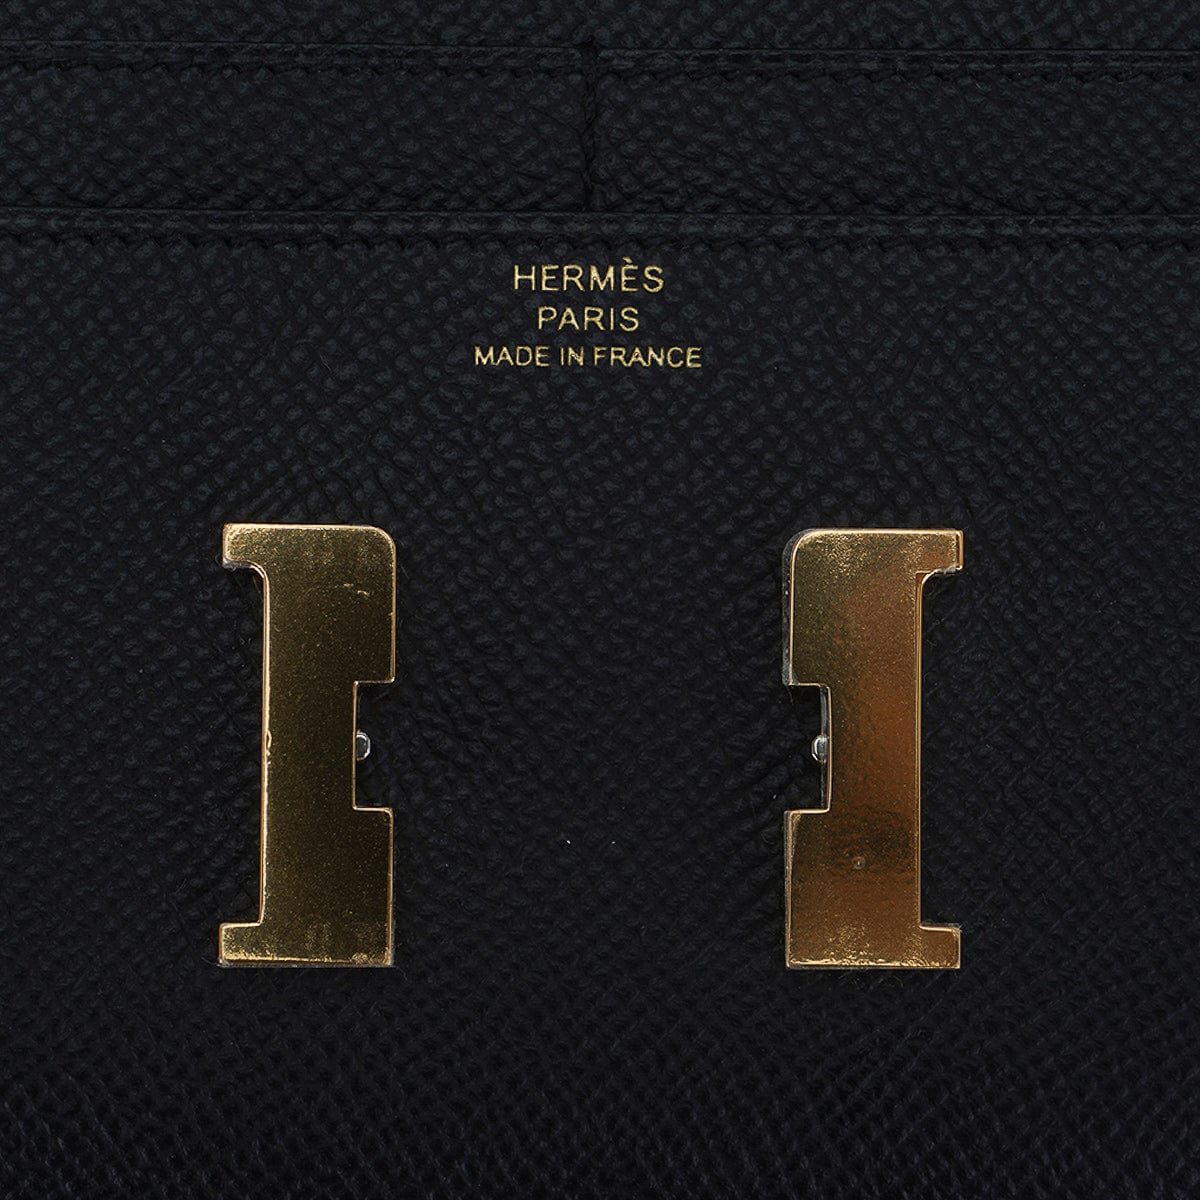 Hermes Constance Compact Passant Wallet Bleu Atoll Epsom Gold Hardware –  Coco Approved Studio